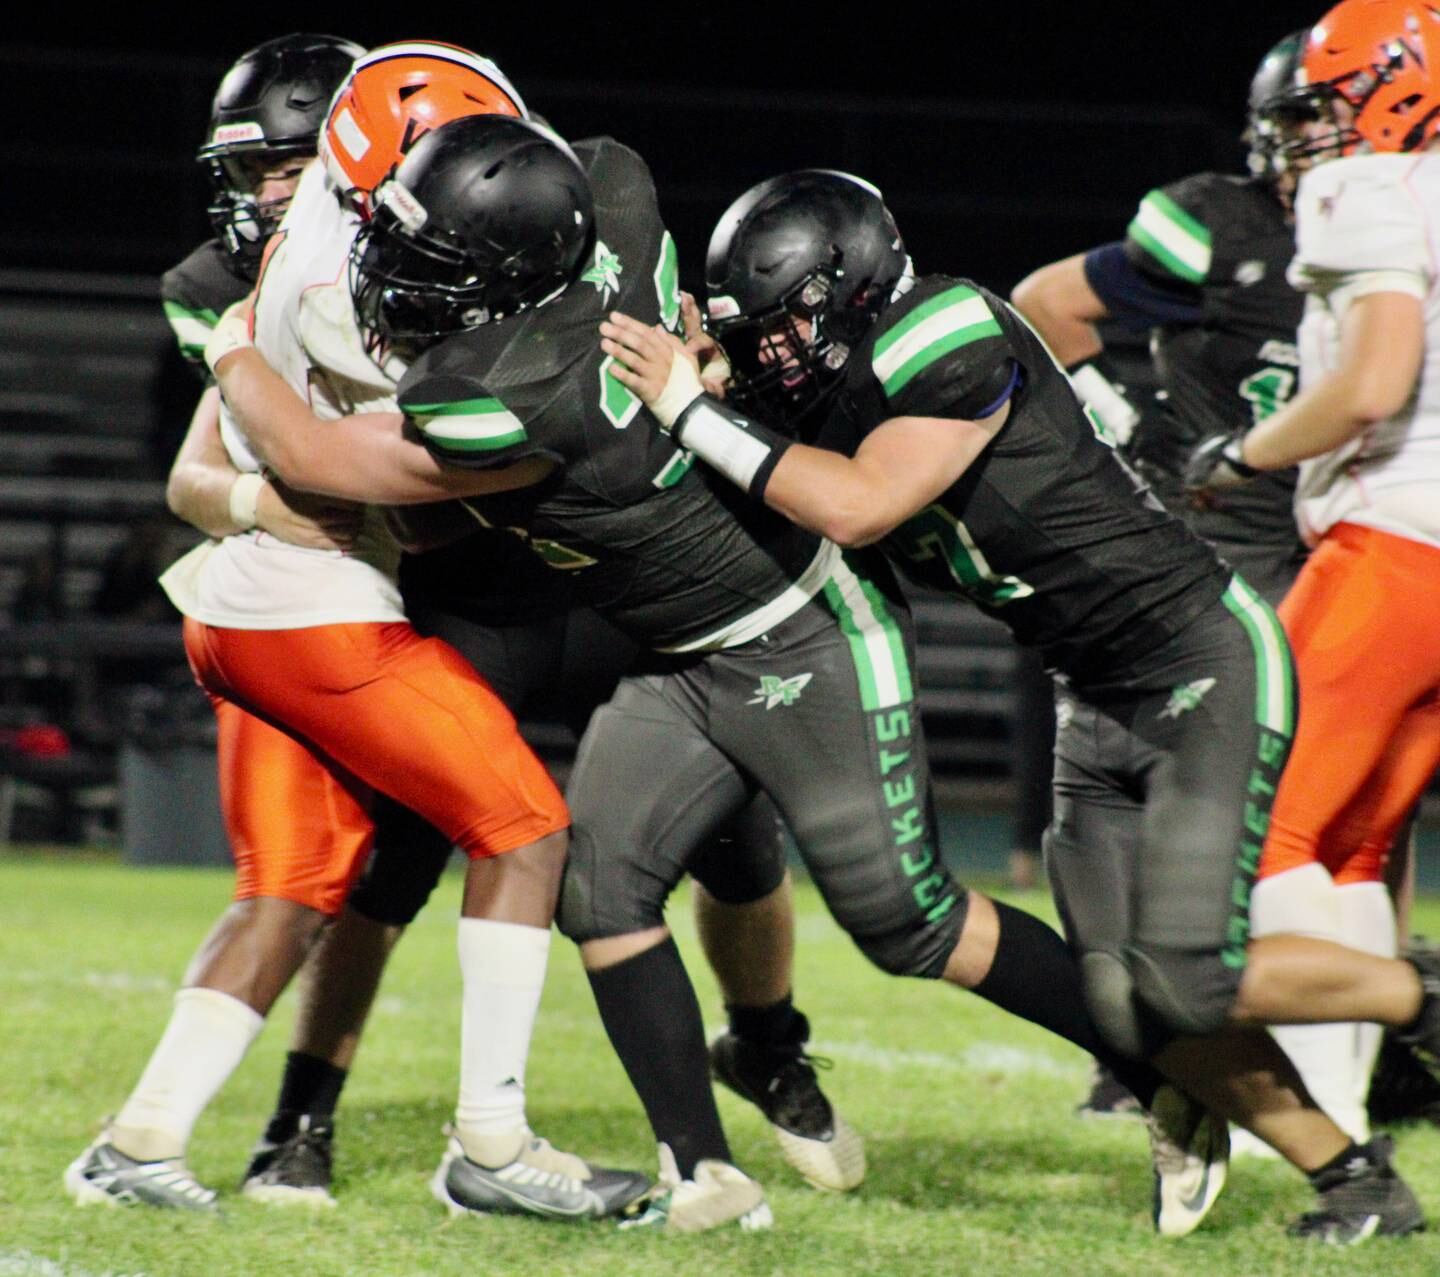 Rock Falls' Ethan Hiland (32) leads the tackle on the Winnebago ball carrier on Friday in Rock Falls.